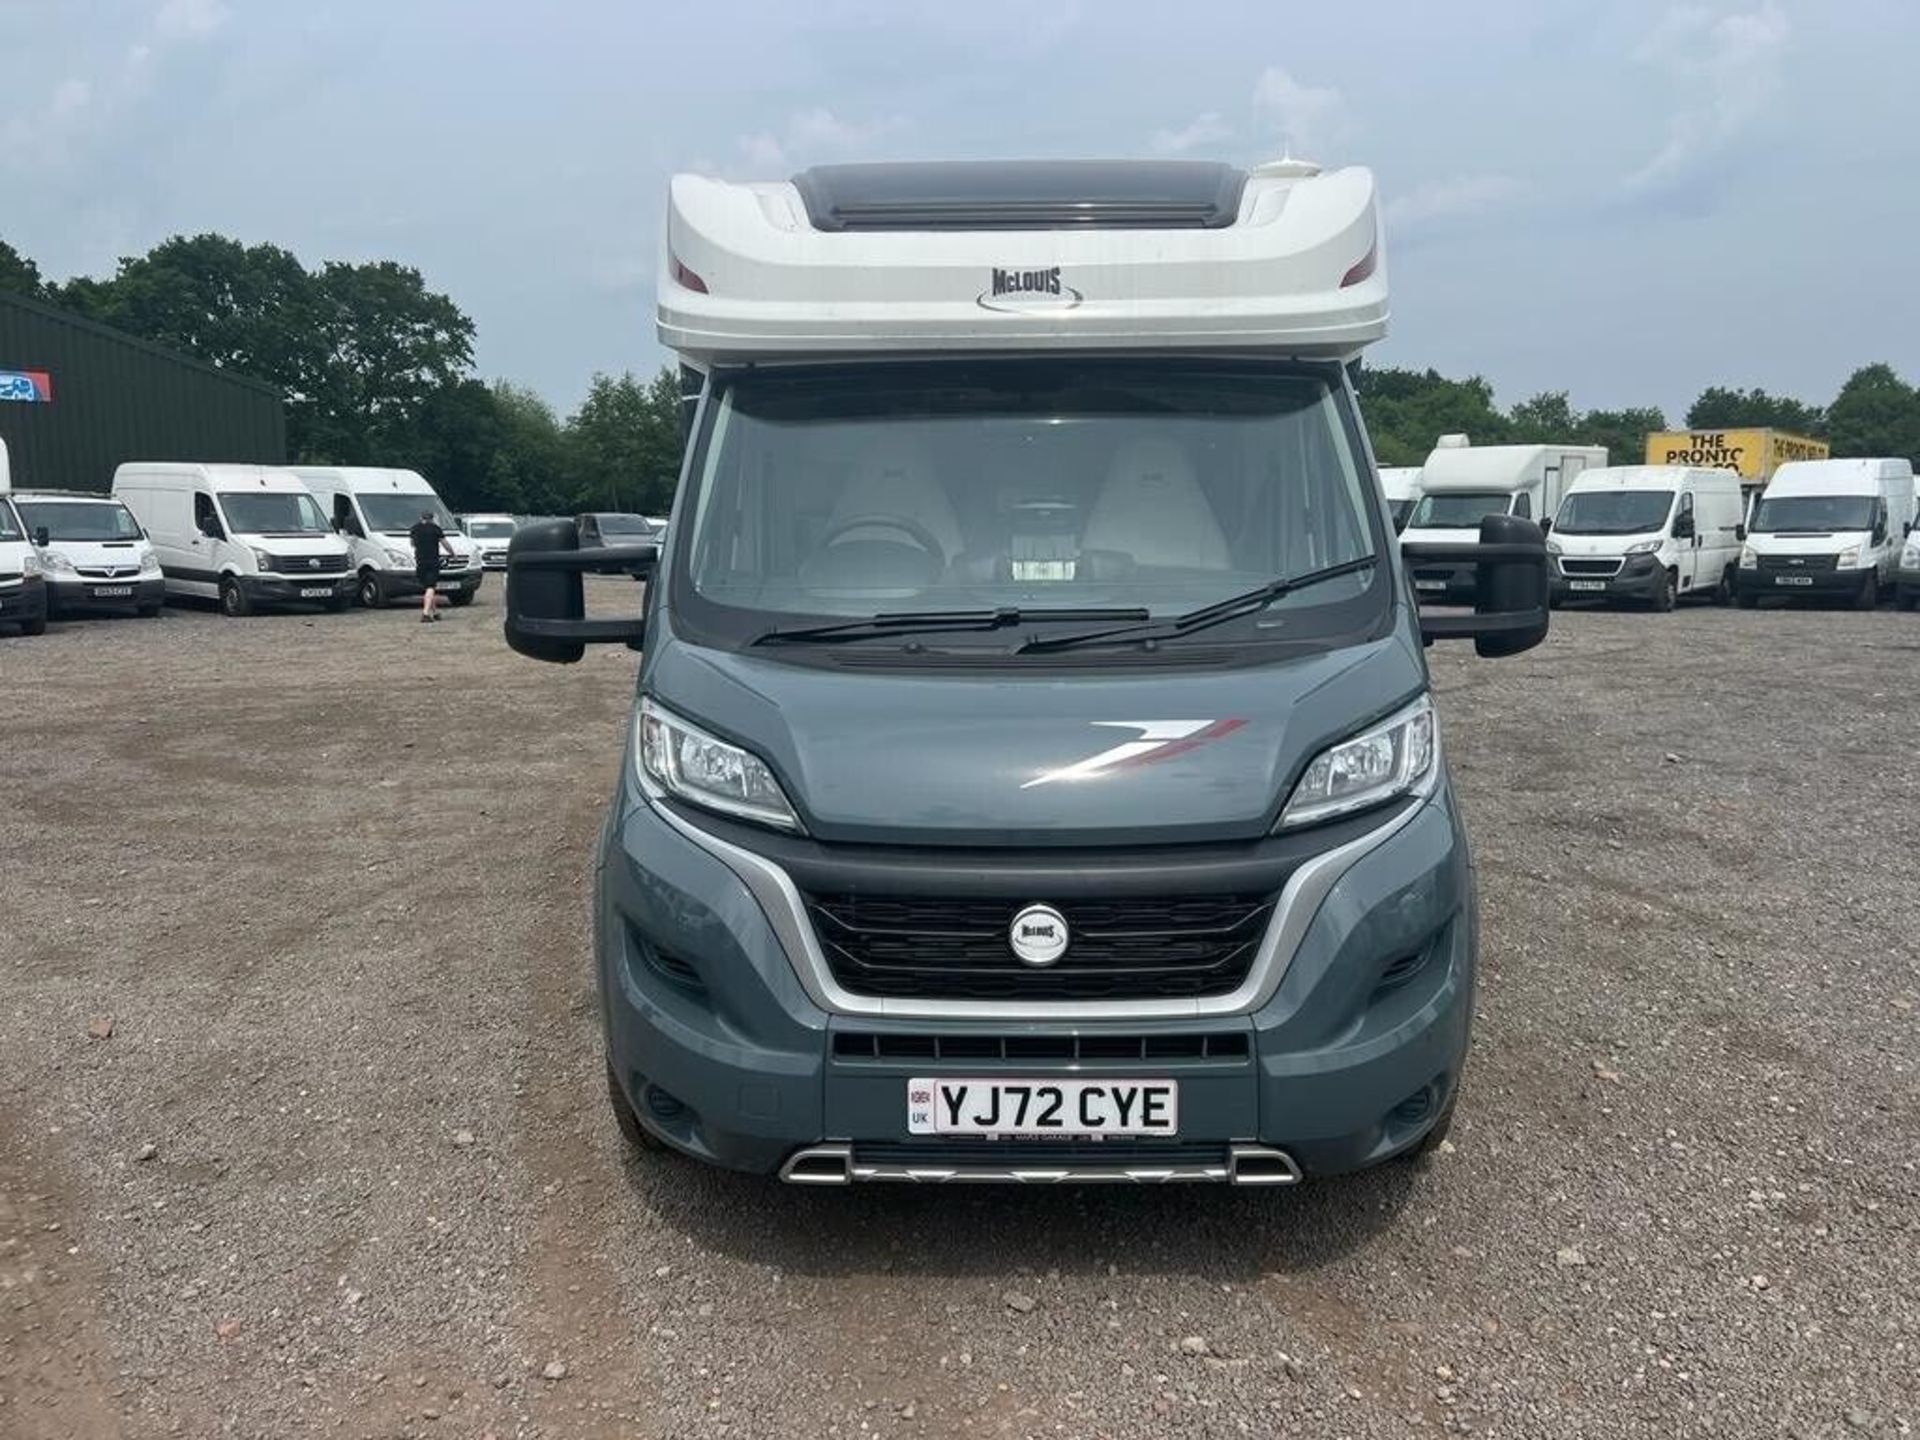 72 PLATE - ONLY 750 MILES! FIAT MCLOUIS FUSION 367: IMMACULATE MOTORHOME JOY >NO VAT ON HAMMER< - Image 3 of 15